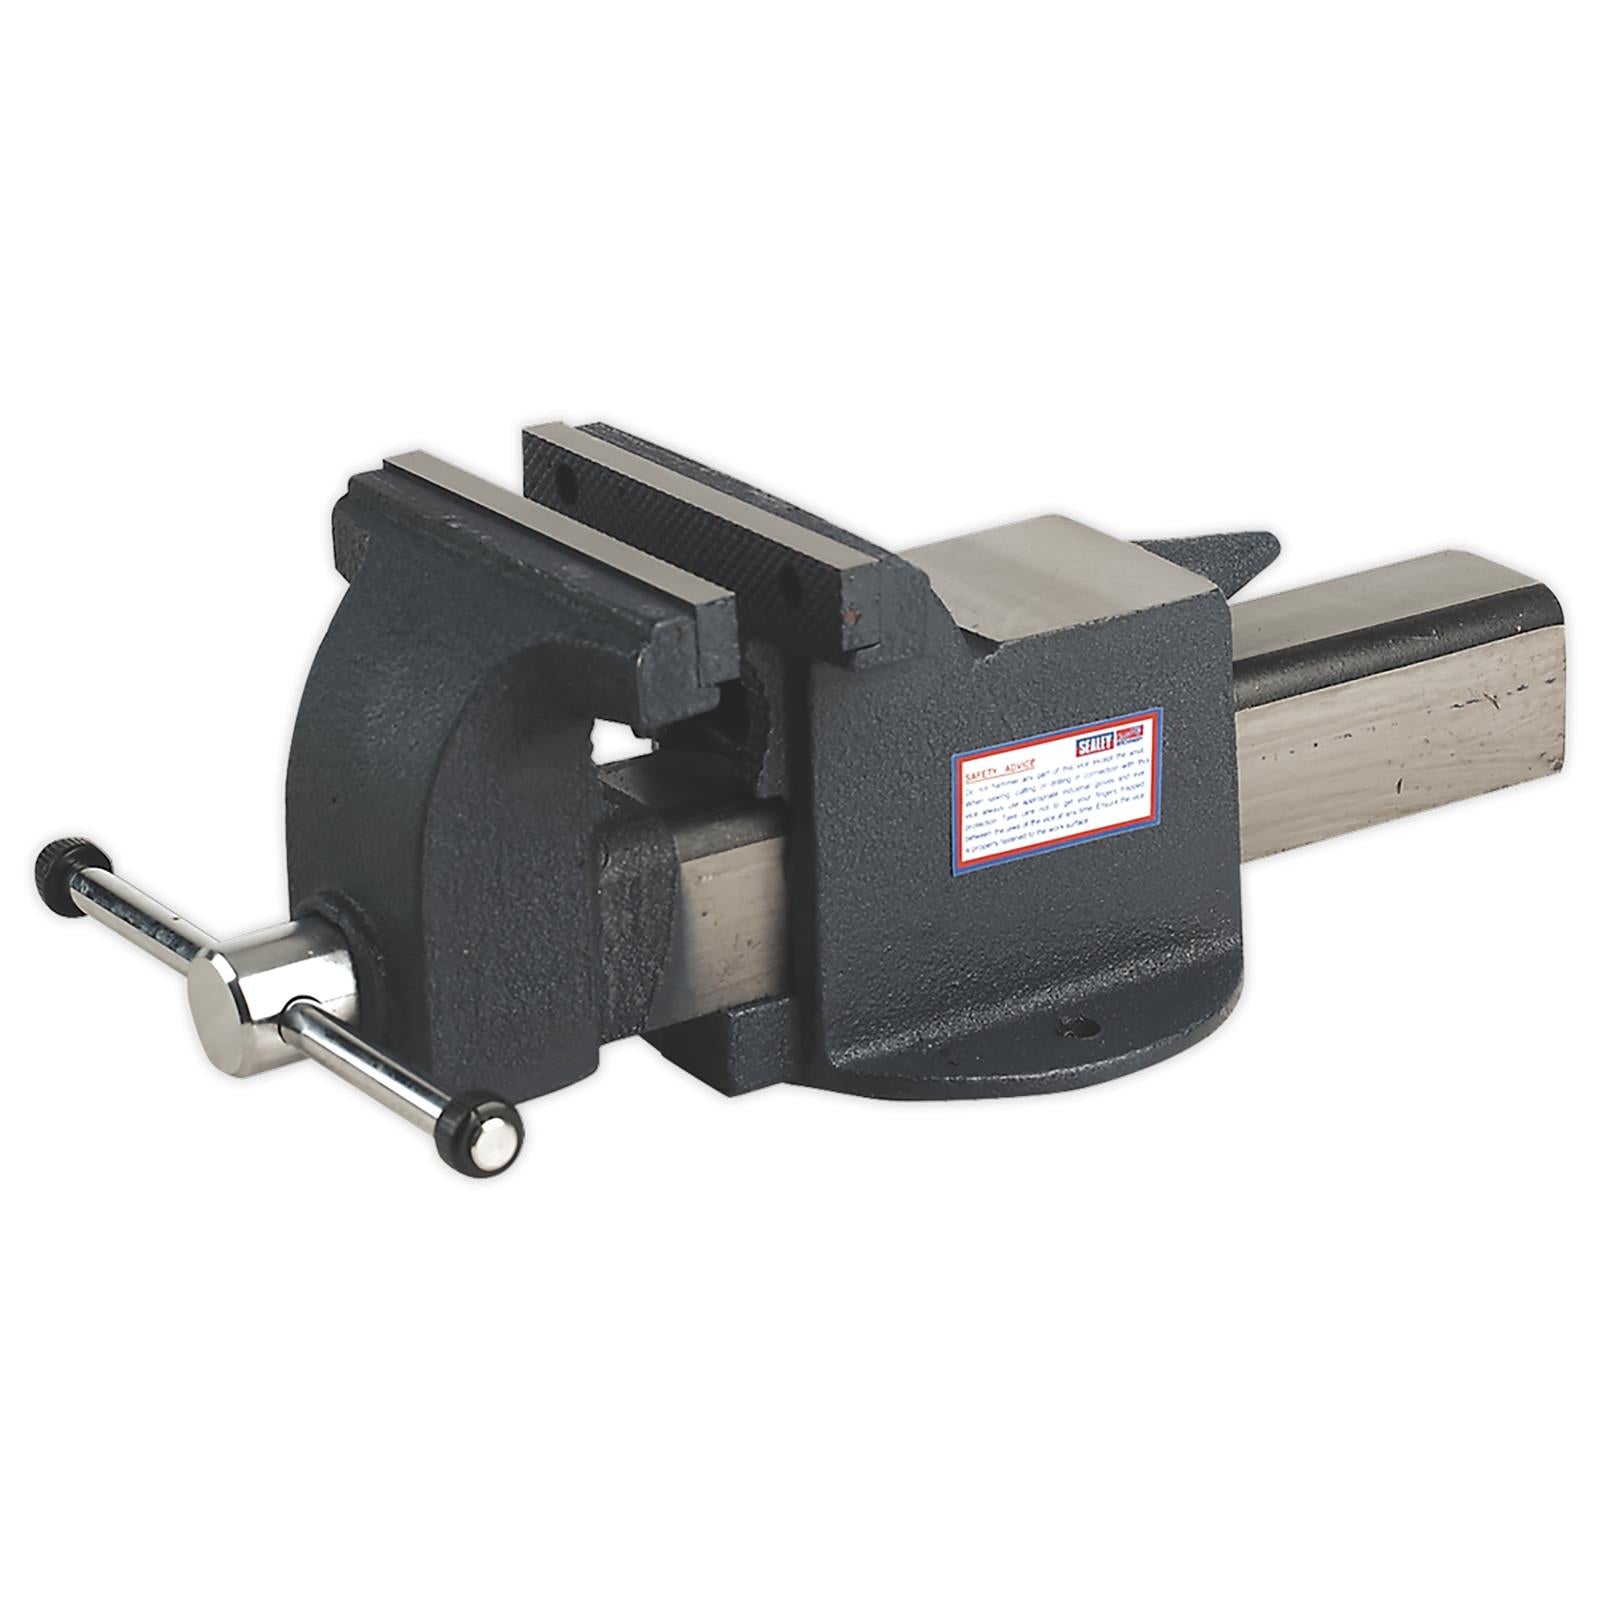 Sealey Vice All Steel 150mm Clamp